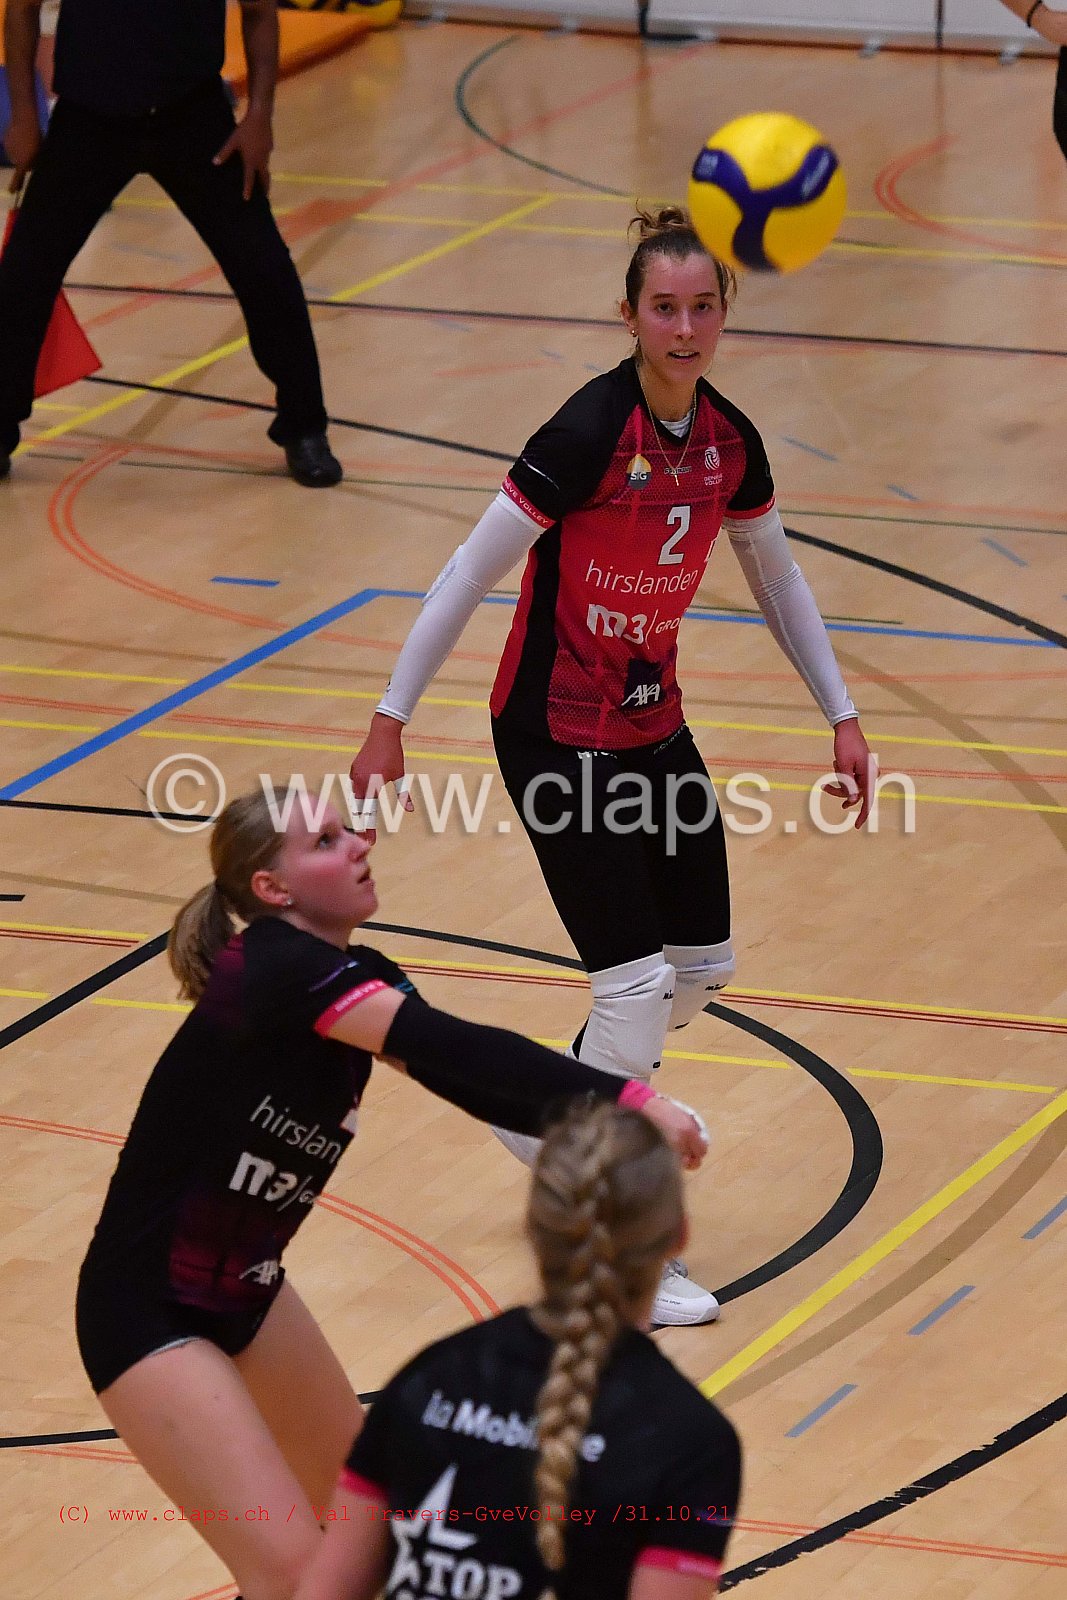 20211031 Val Travers - Geneve Volley